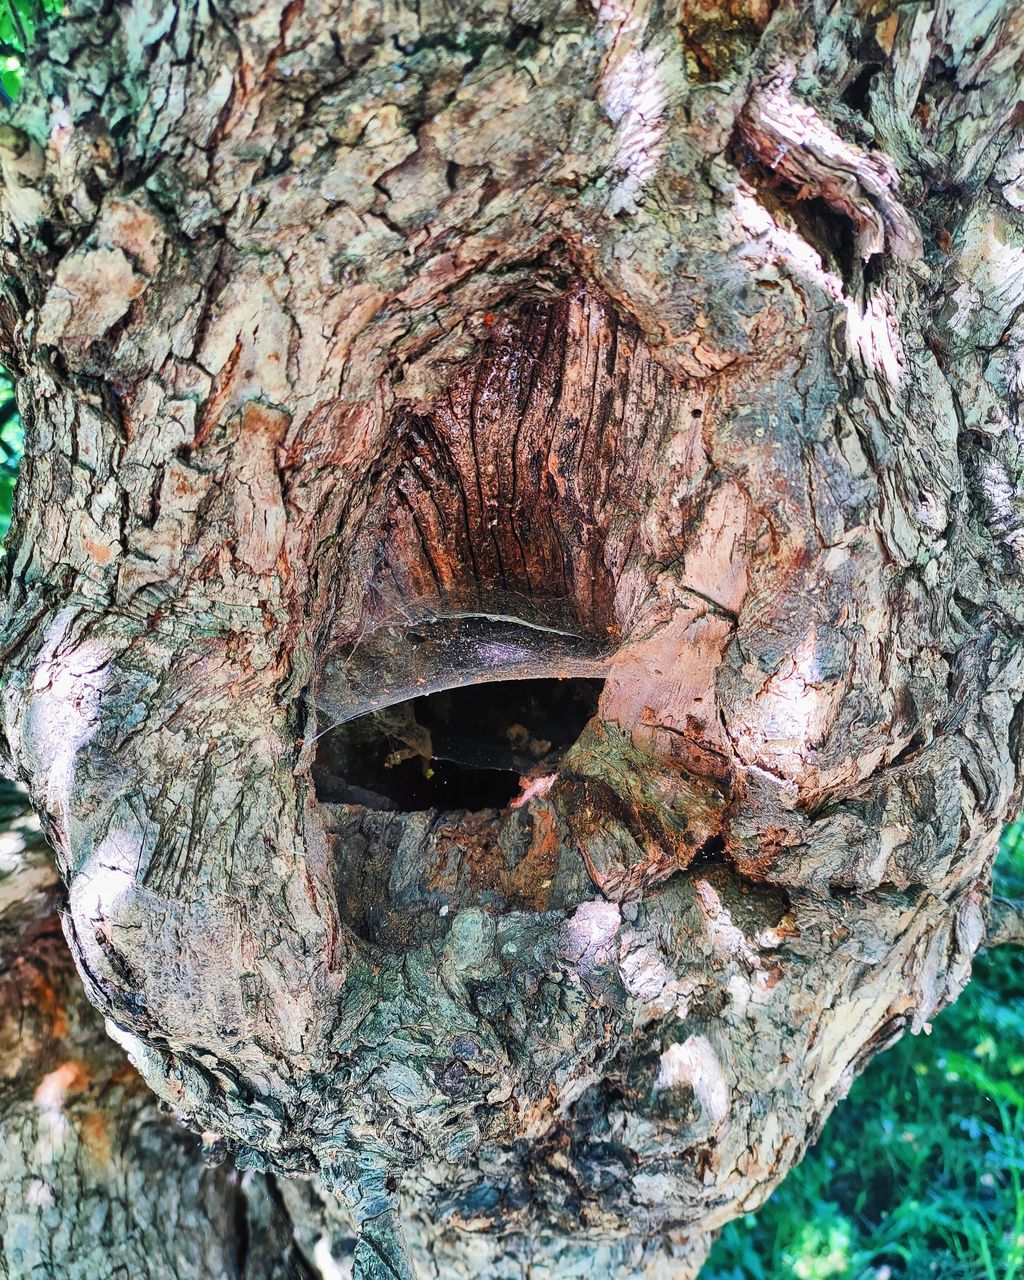 CLOSE-UP OF TREE TRUNK WITH HOLE IN PLANT